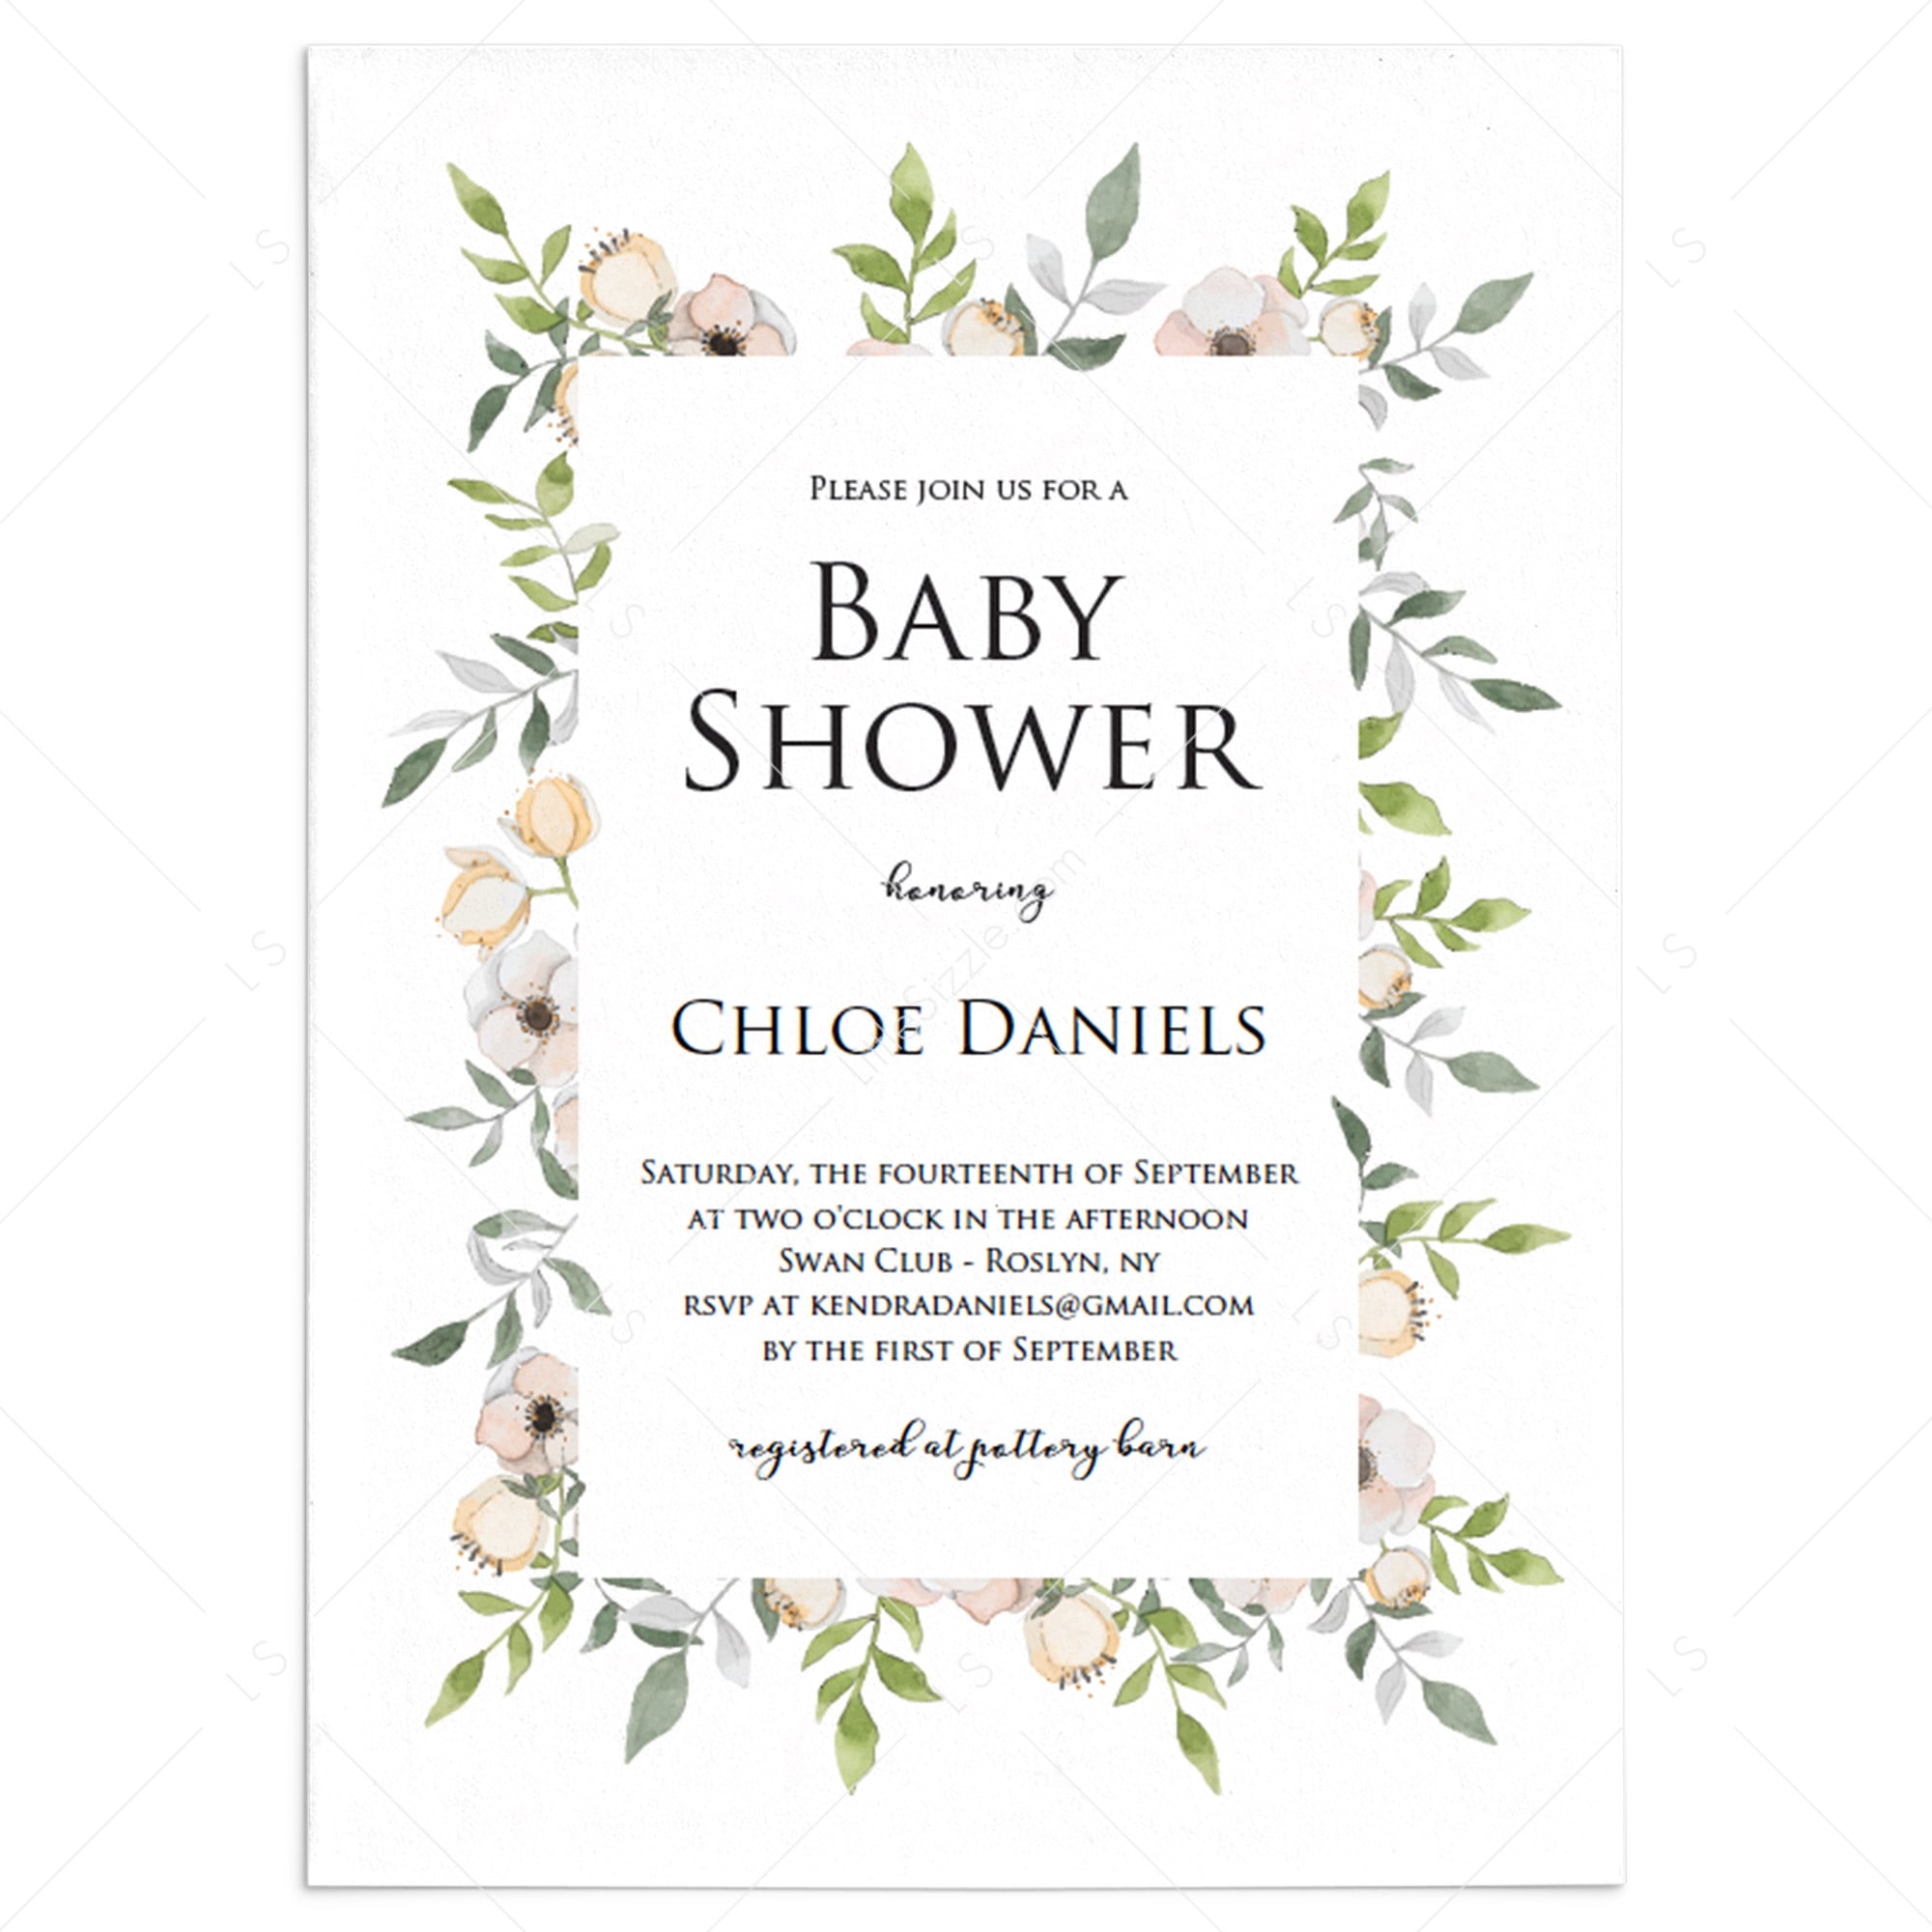 Blush baby shower invitation template with floral frame by LittleSizzle